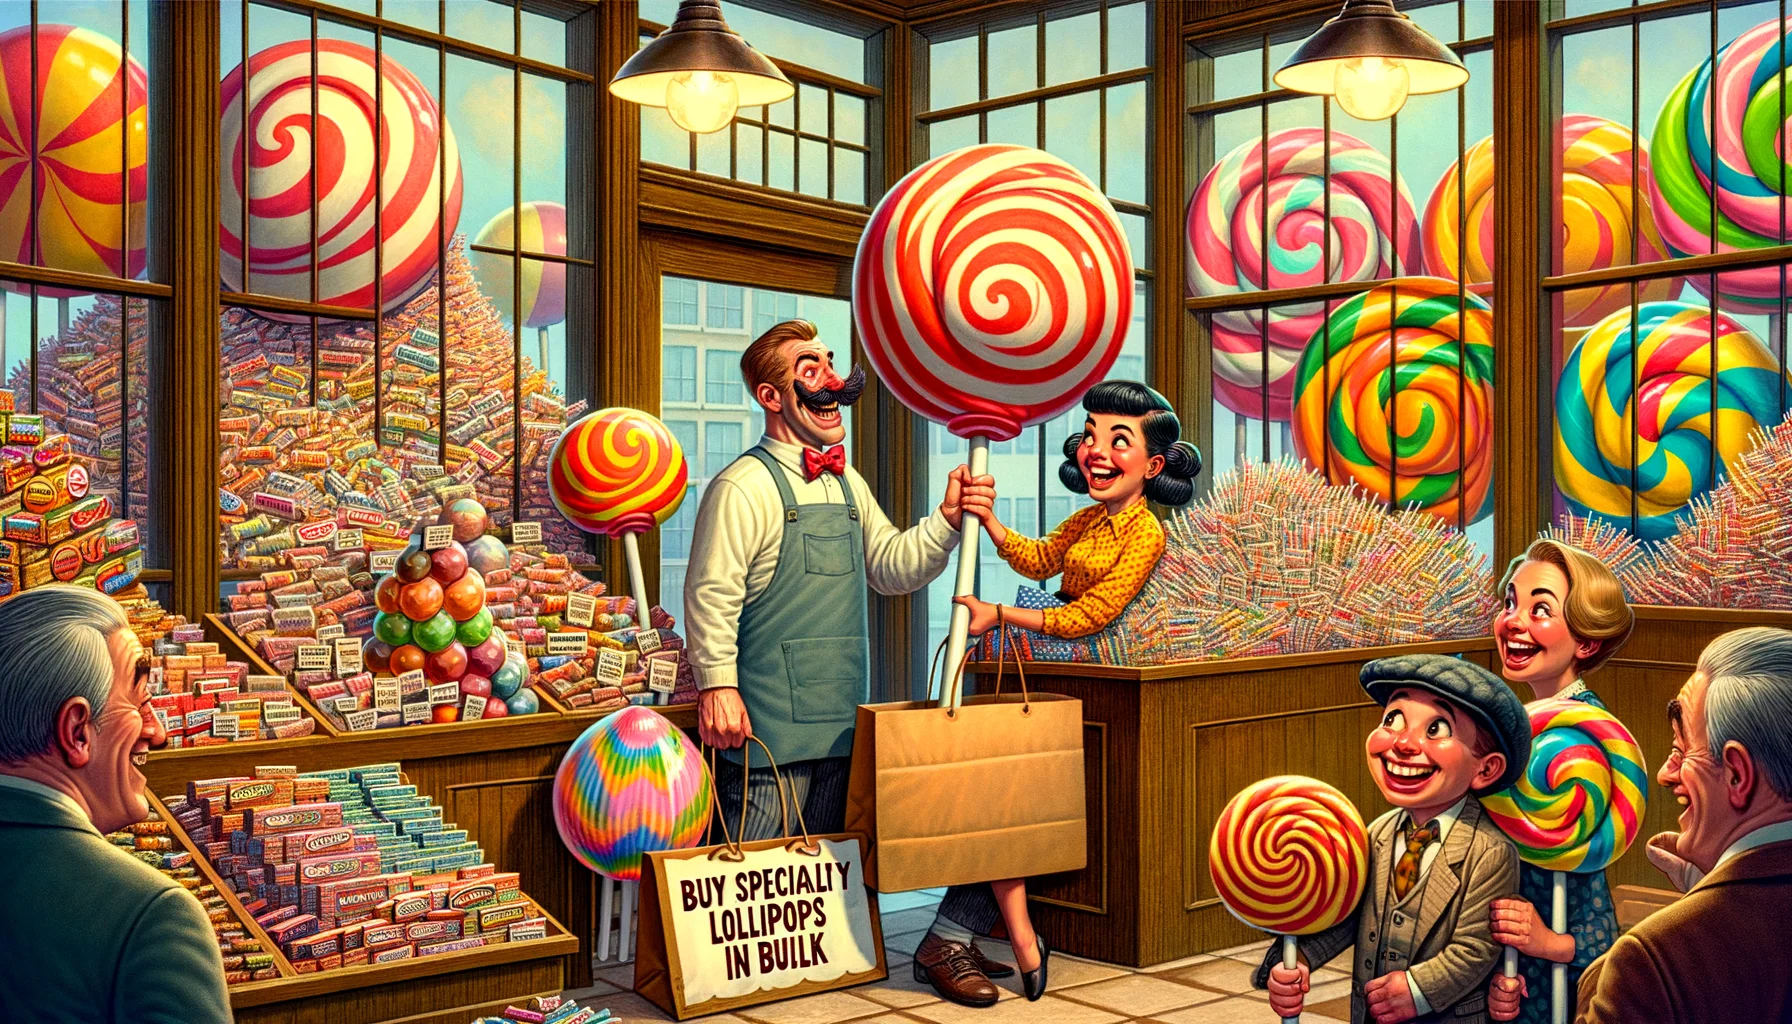 Imagine an unexpectedly amusing scene inside a vintage candy store. Stacks of brightly colored specialty lollipops are piled high on wooden shelves, and the store is packed with excited customers holding giant shopping bags. A Caucasian male shopkeeper with a comical mustache is happily striking a deal with a Middle-Eastern woman holding a gargantuan lollipop, as a South Asian child with a wide-eyed expression is peering up from a gigantic shopping bag brimming with lollipops. Outside the jolly glass-paneled shop, a quirky sign stands tall, displaying the text 'Buy Specialty Lollipops in Bulk' with cartoonish flourish.